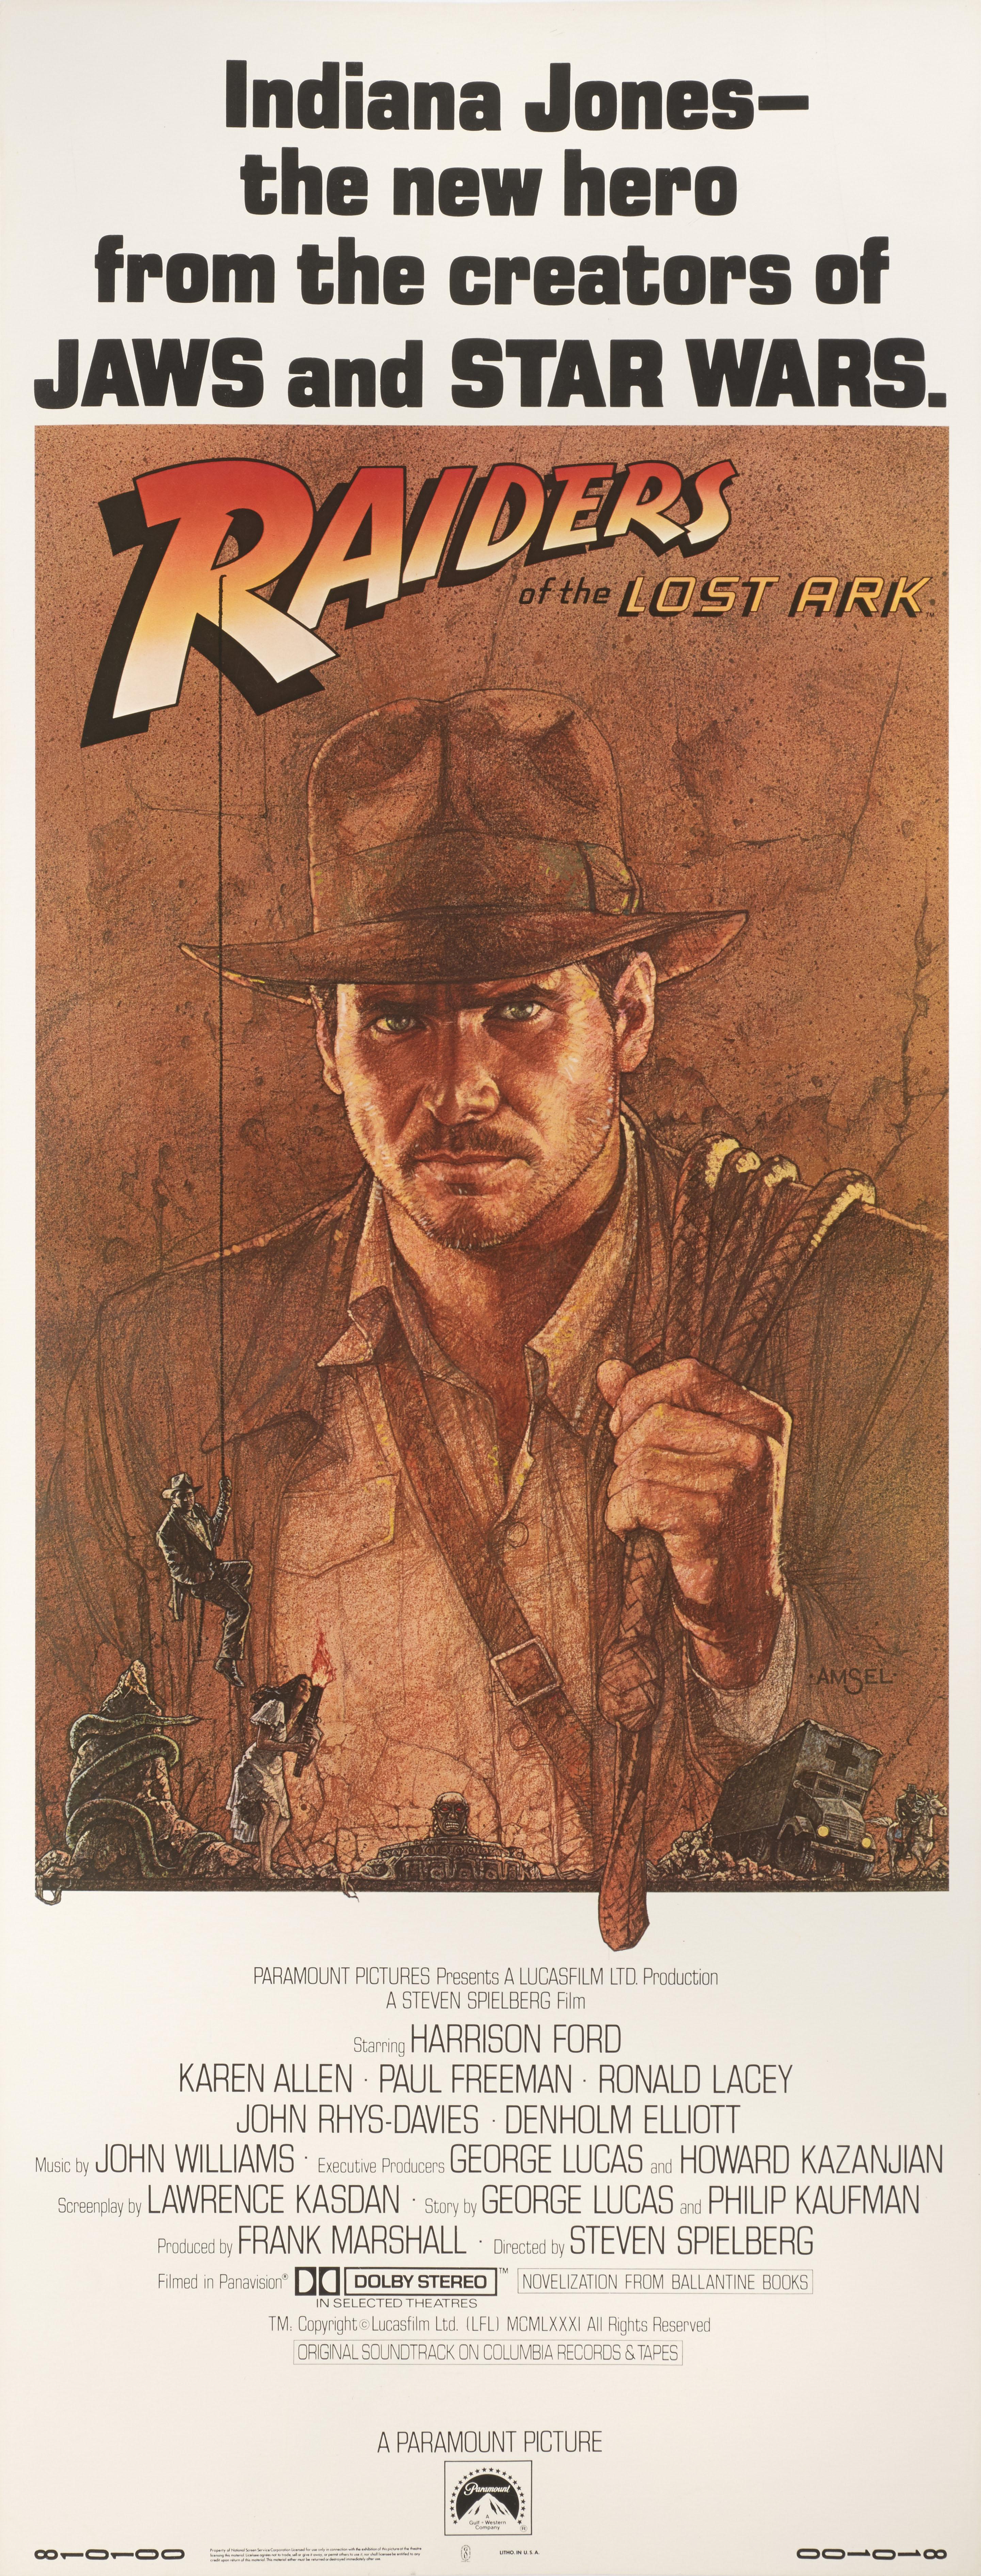 Original American film poster for Steven Spielberg's 1981 blockbuster adventure film starring Harrison Ford. The artwork is by Richard Amsel (1947-1985).
This poster is unfolded and  conservation paper backed and would be sent out in a very strong